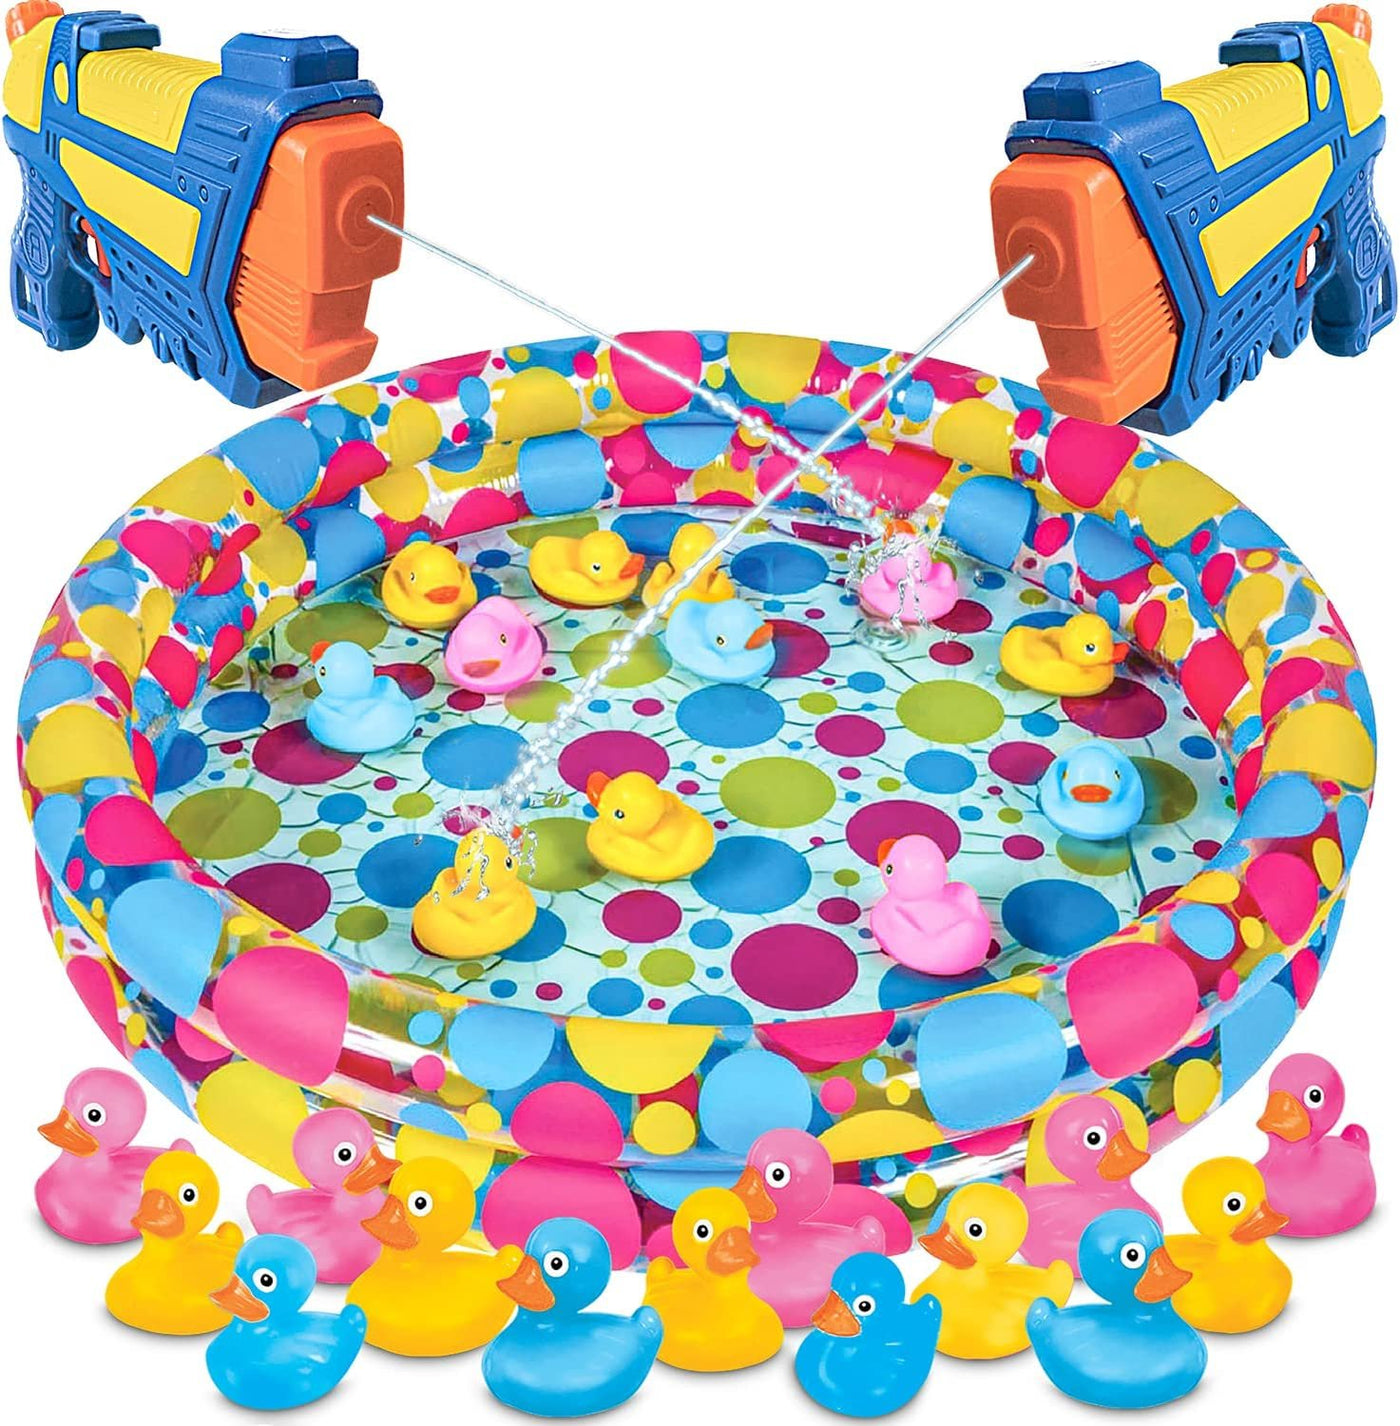 FREE Game Ideas - Carnival Party Games - Matching Ducks  Carnival birthday  party games, Carnival games for kids, School carnival games